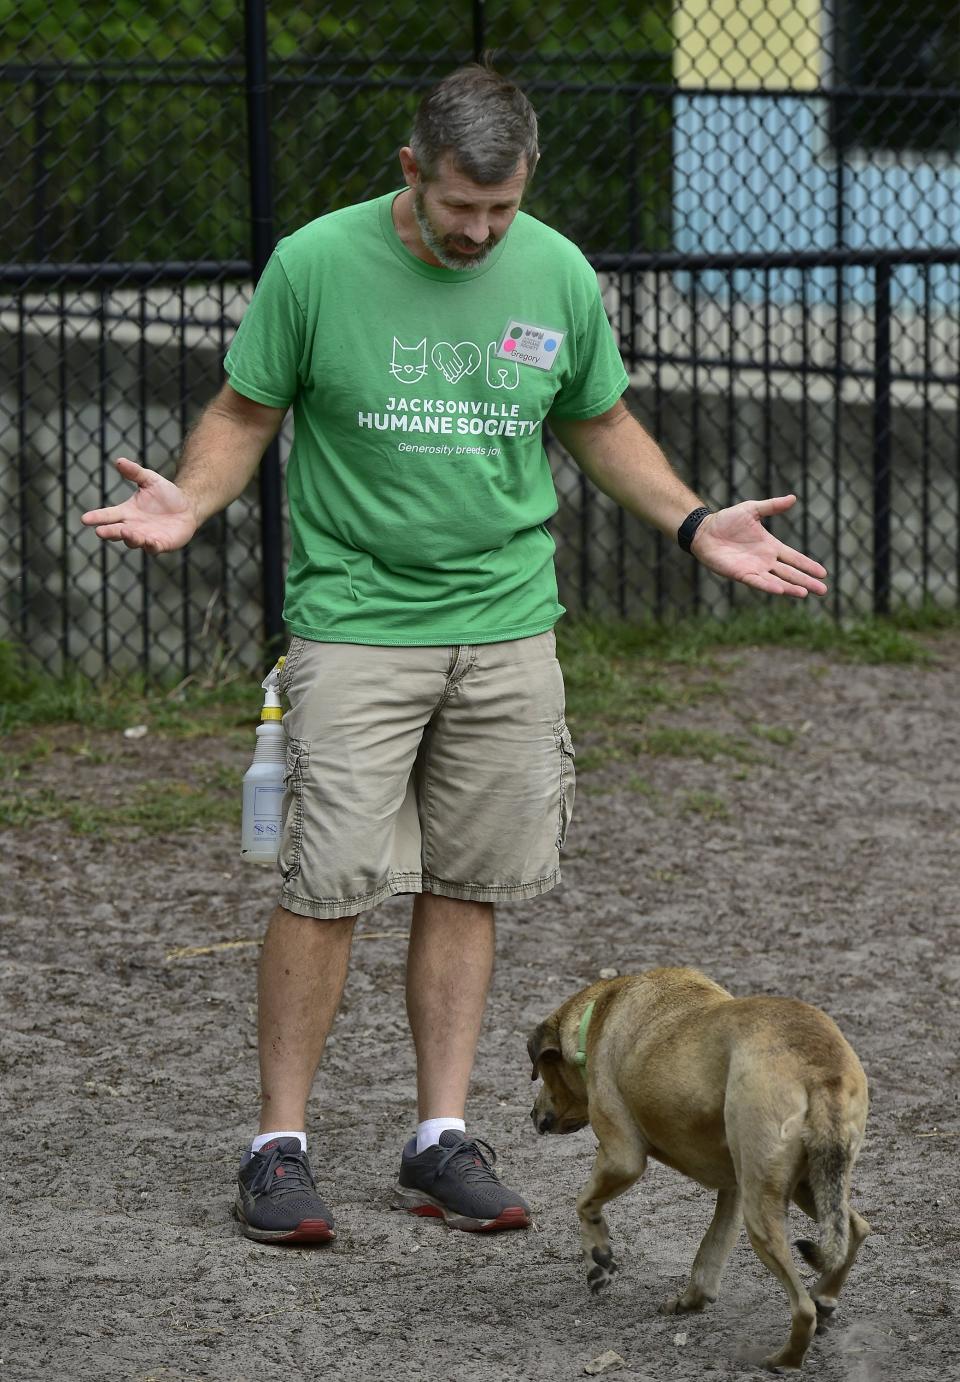 Volunteer Gregory Boyd talks to one of the dogs that did not want to join the others during socializing in the play yard at the Jacksonville Humane Society on Thursday. The Humane Society's Paws & Stripes program offers veterans and military members opportunities for volunteering and career training. Boyd is one of the veterans going through the program.